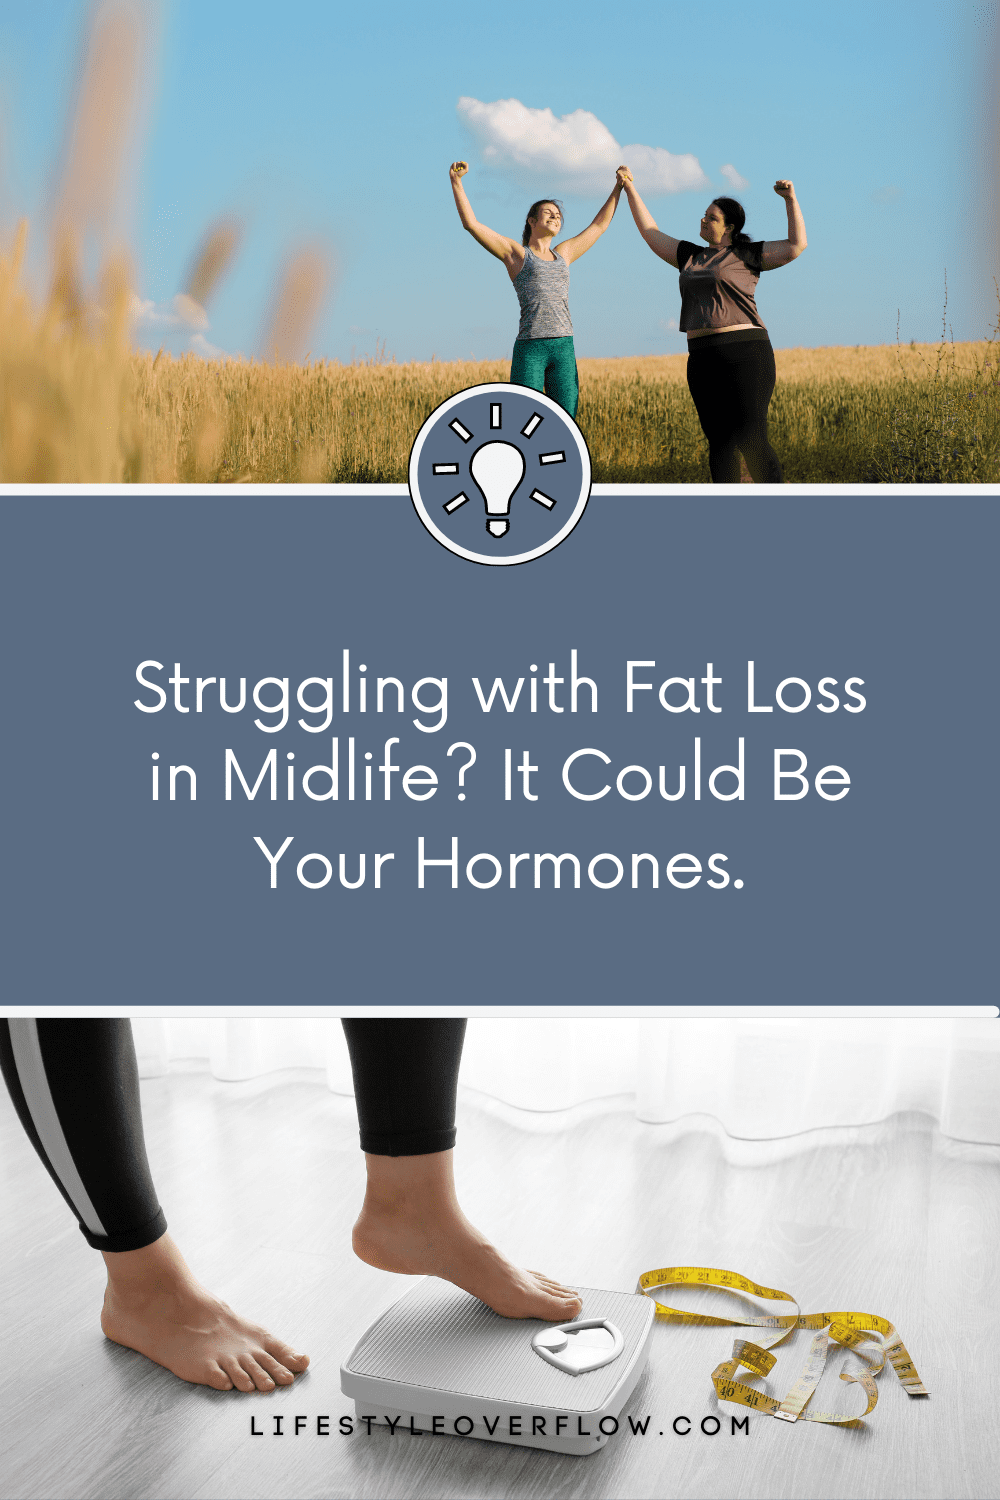 two photos; two women walking by a field; a woman standing on a scale. Blue box with text: struggling with fat loss in midlife? It could be your hormones.